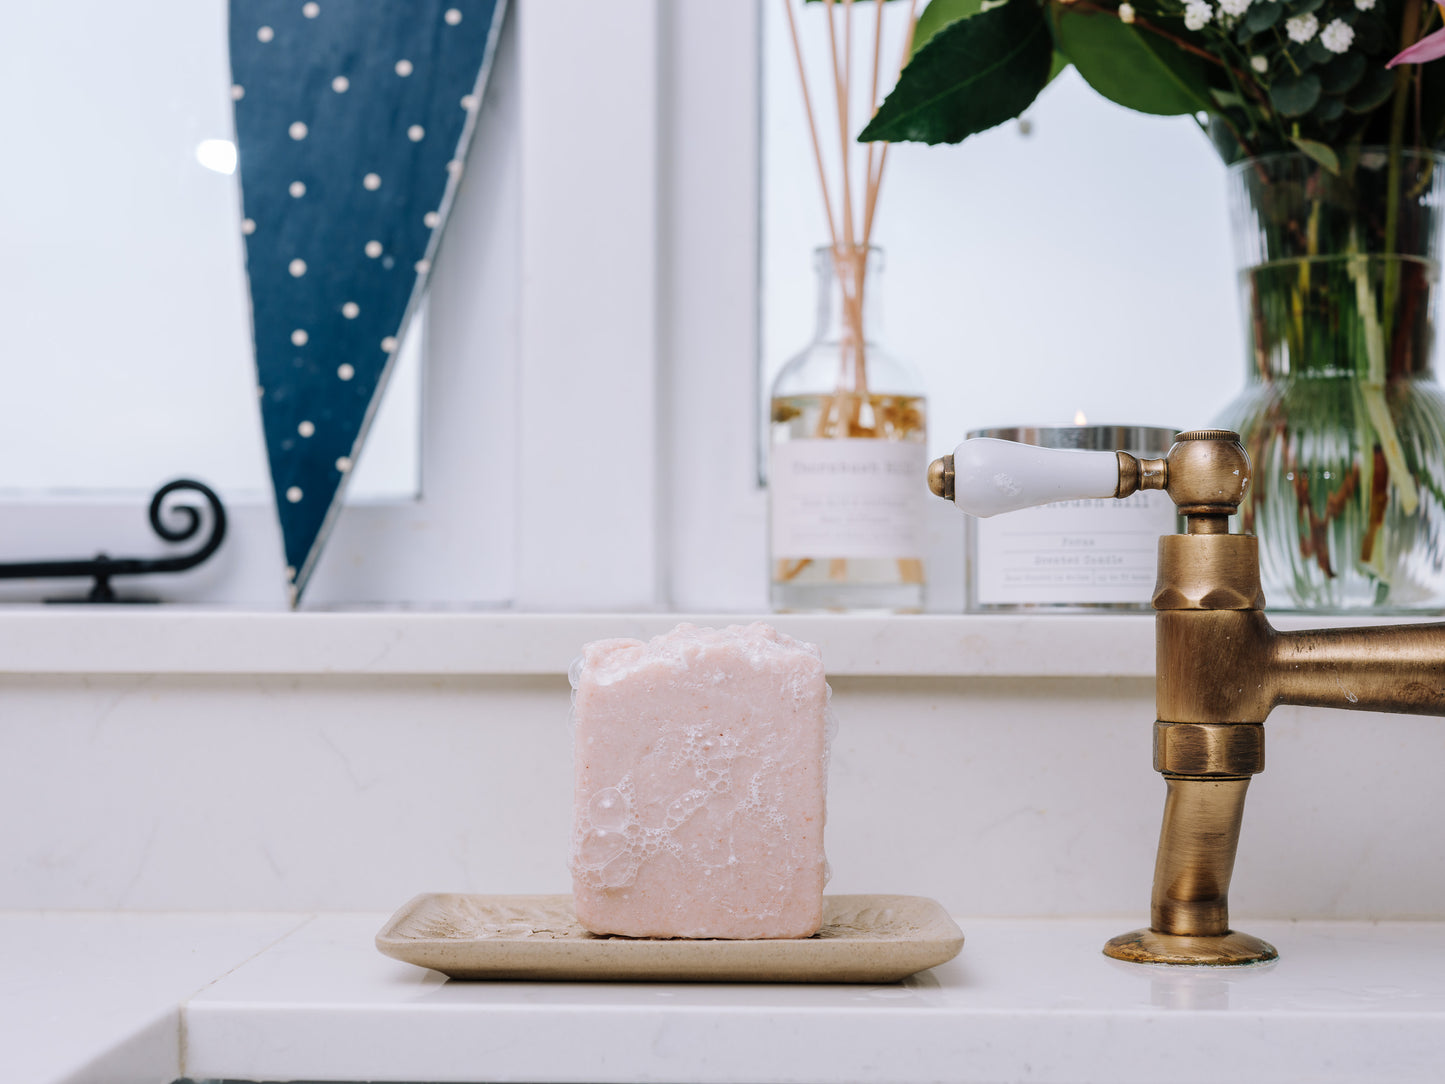 Monthly Natural Soap Subscription